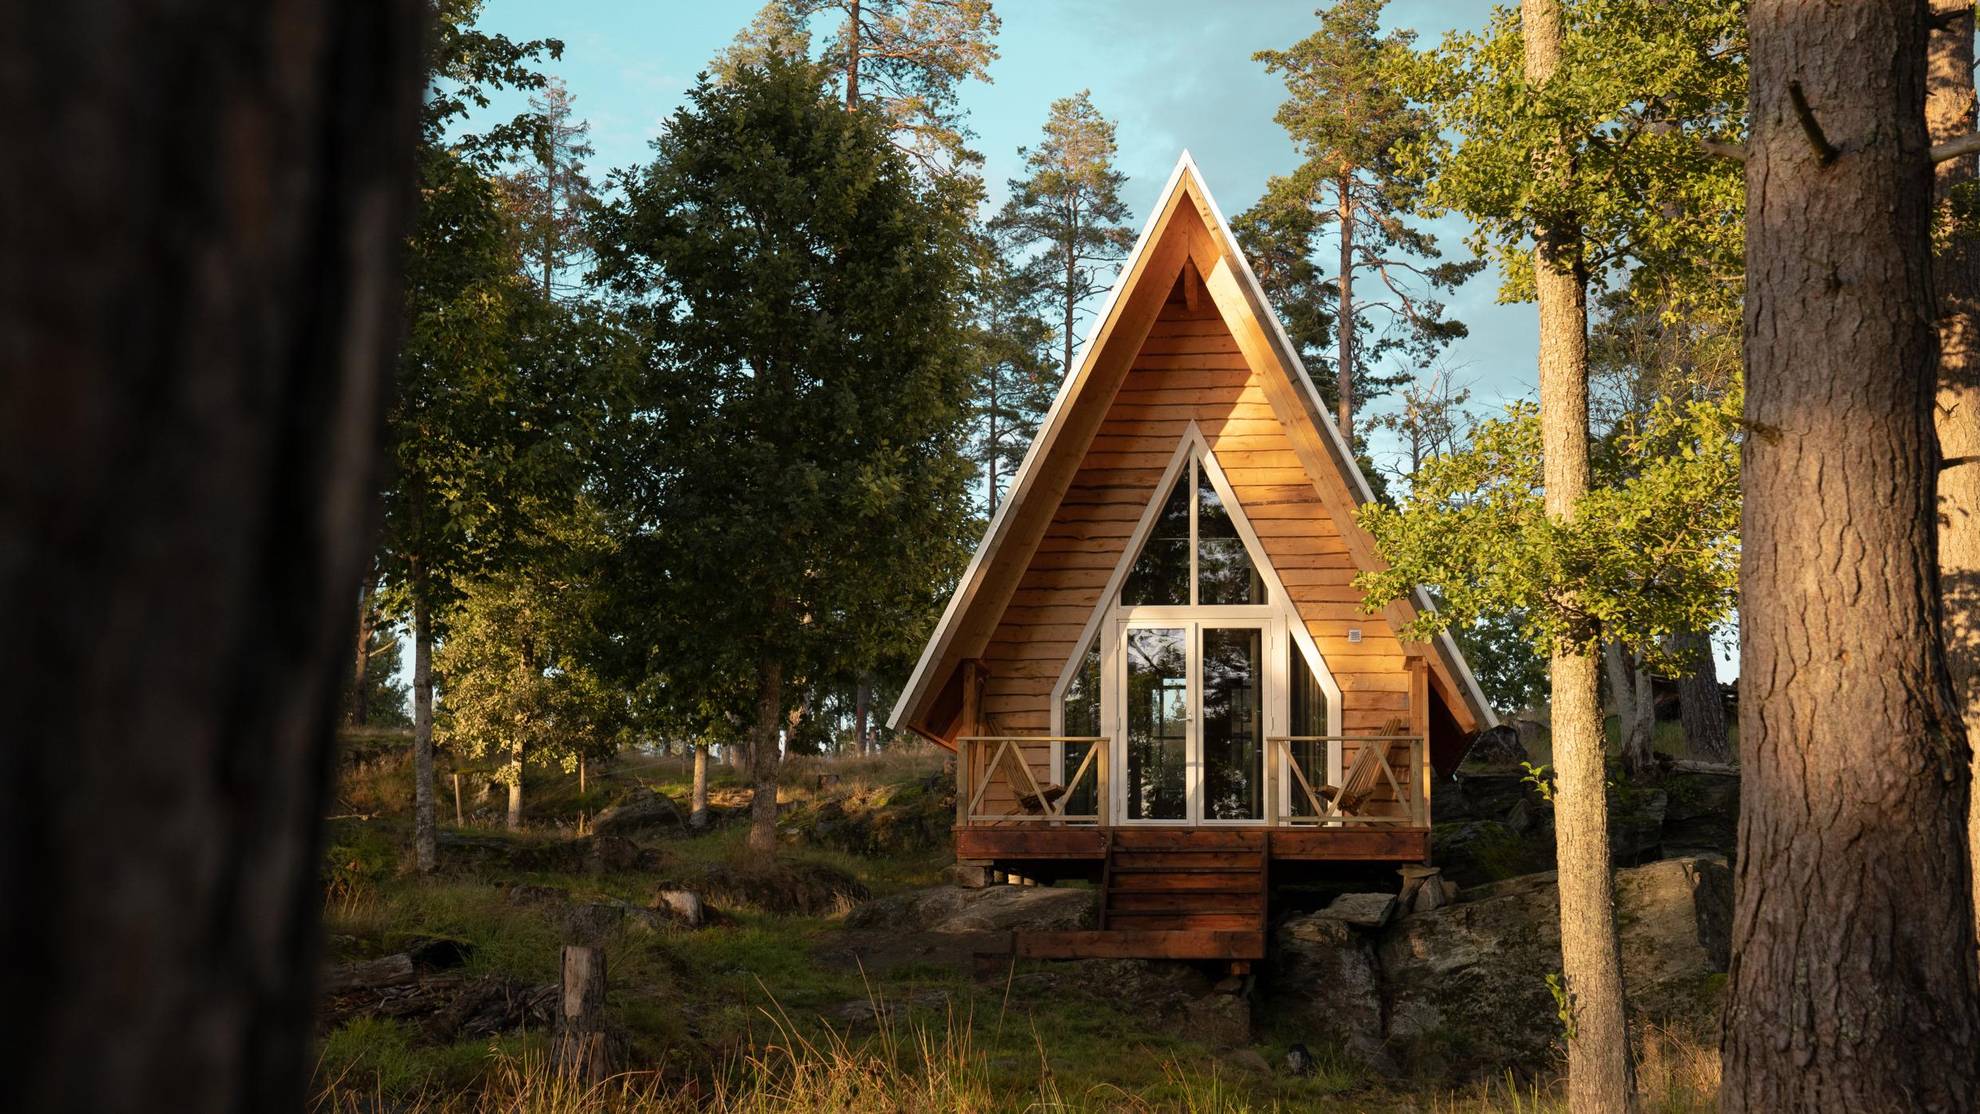 An a-frame house with glass doors located in the forest.